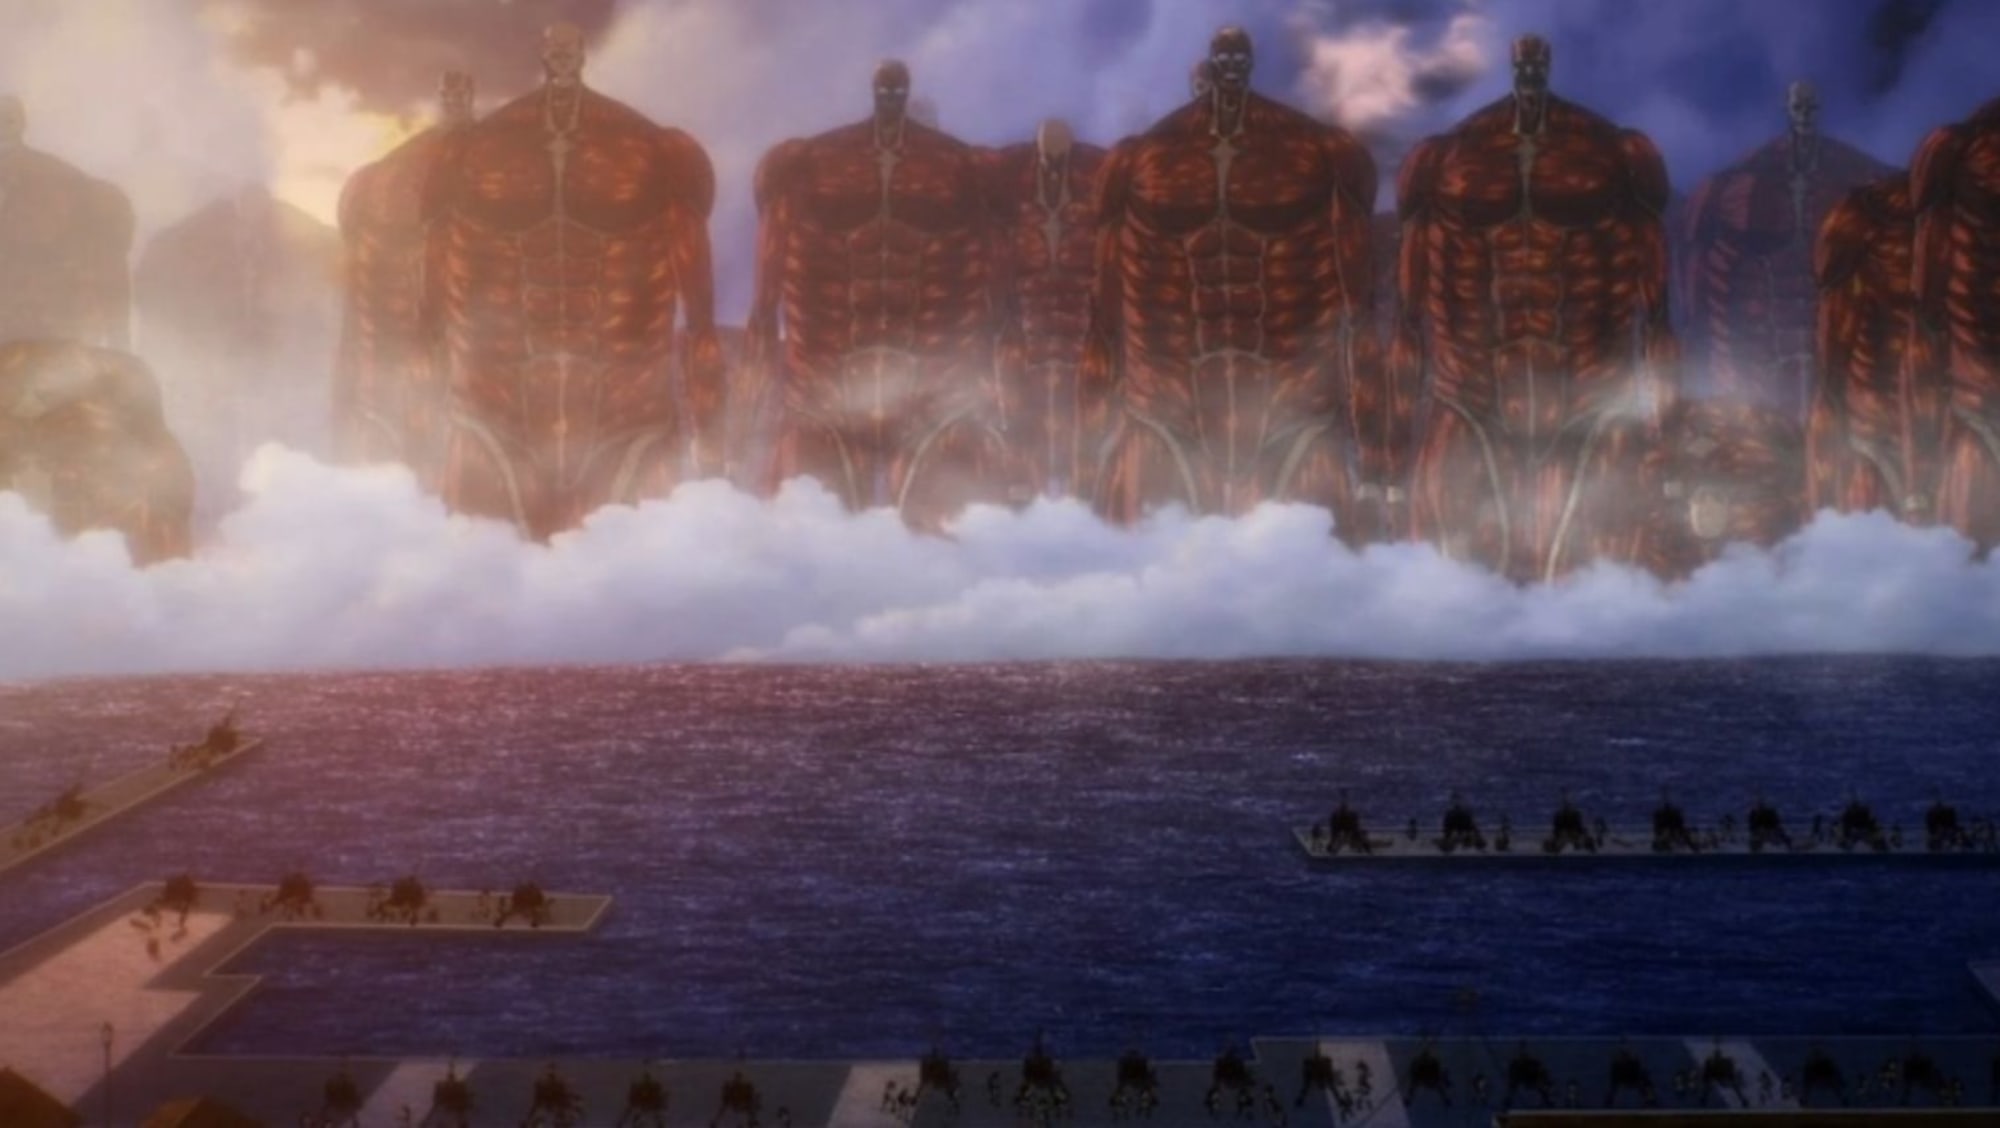 Attack on Titan Season 4 Part 3: Which characters are still alive